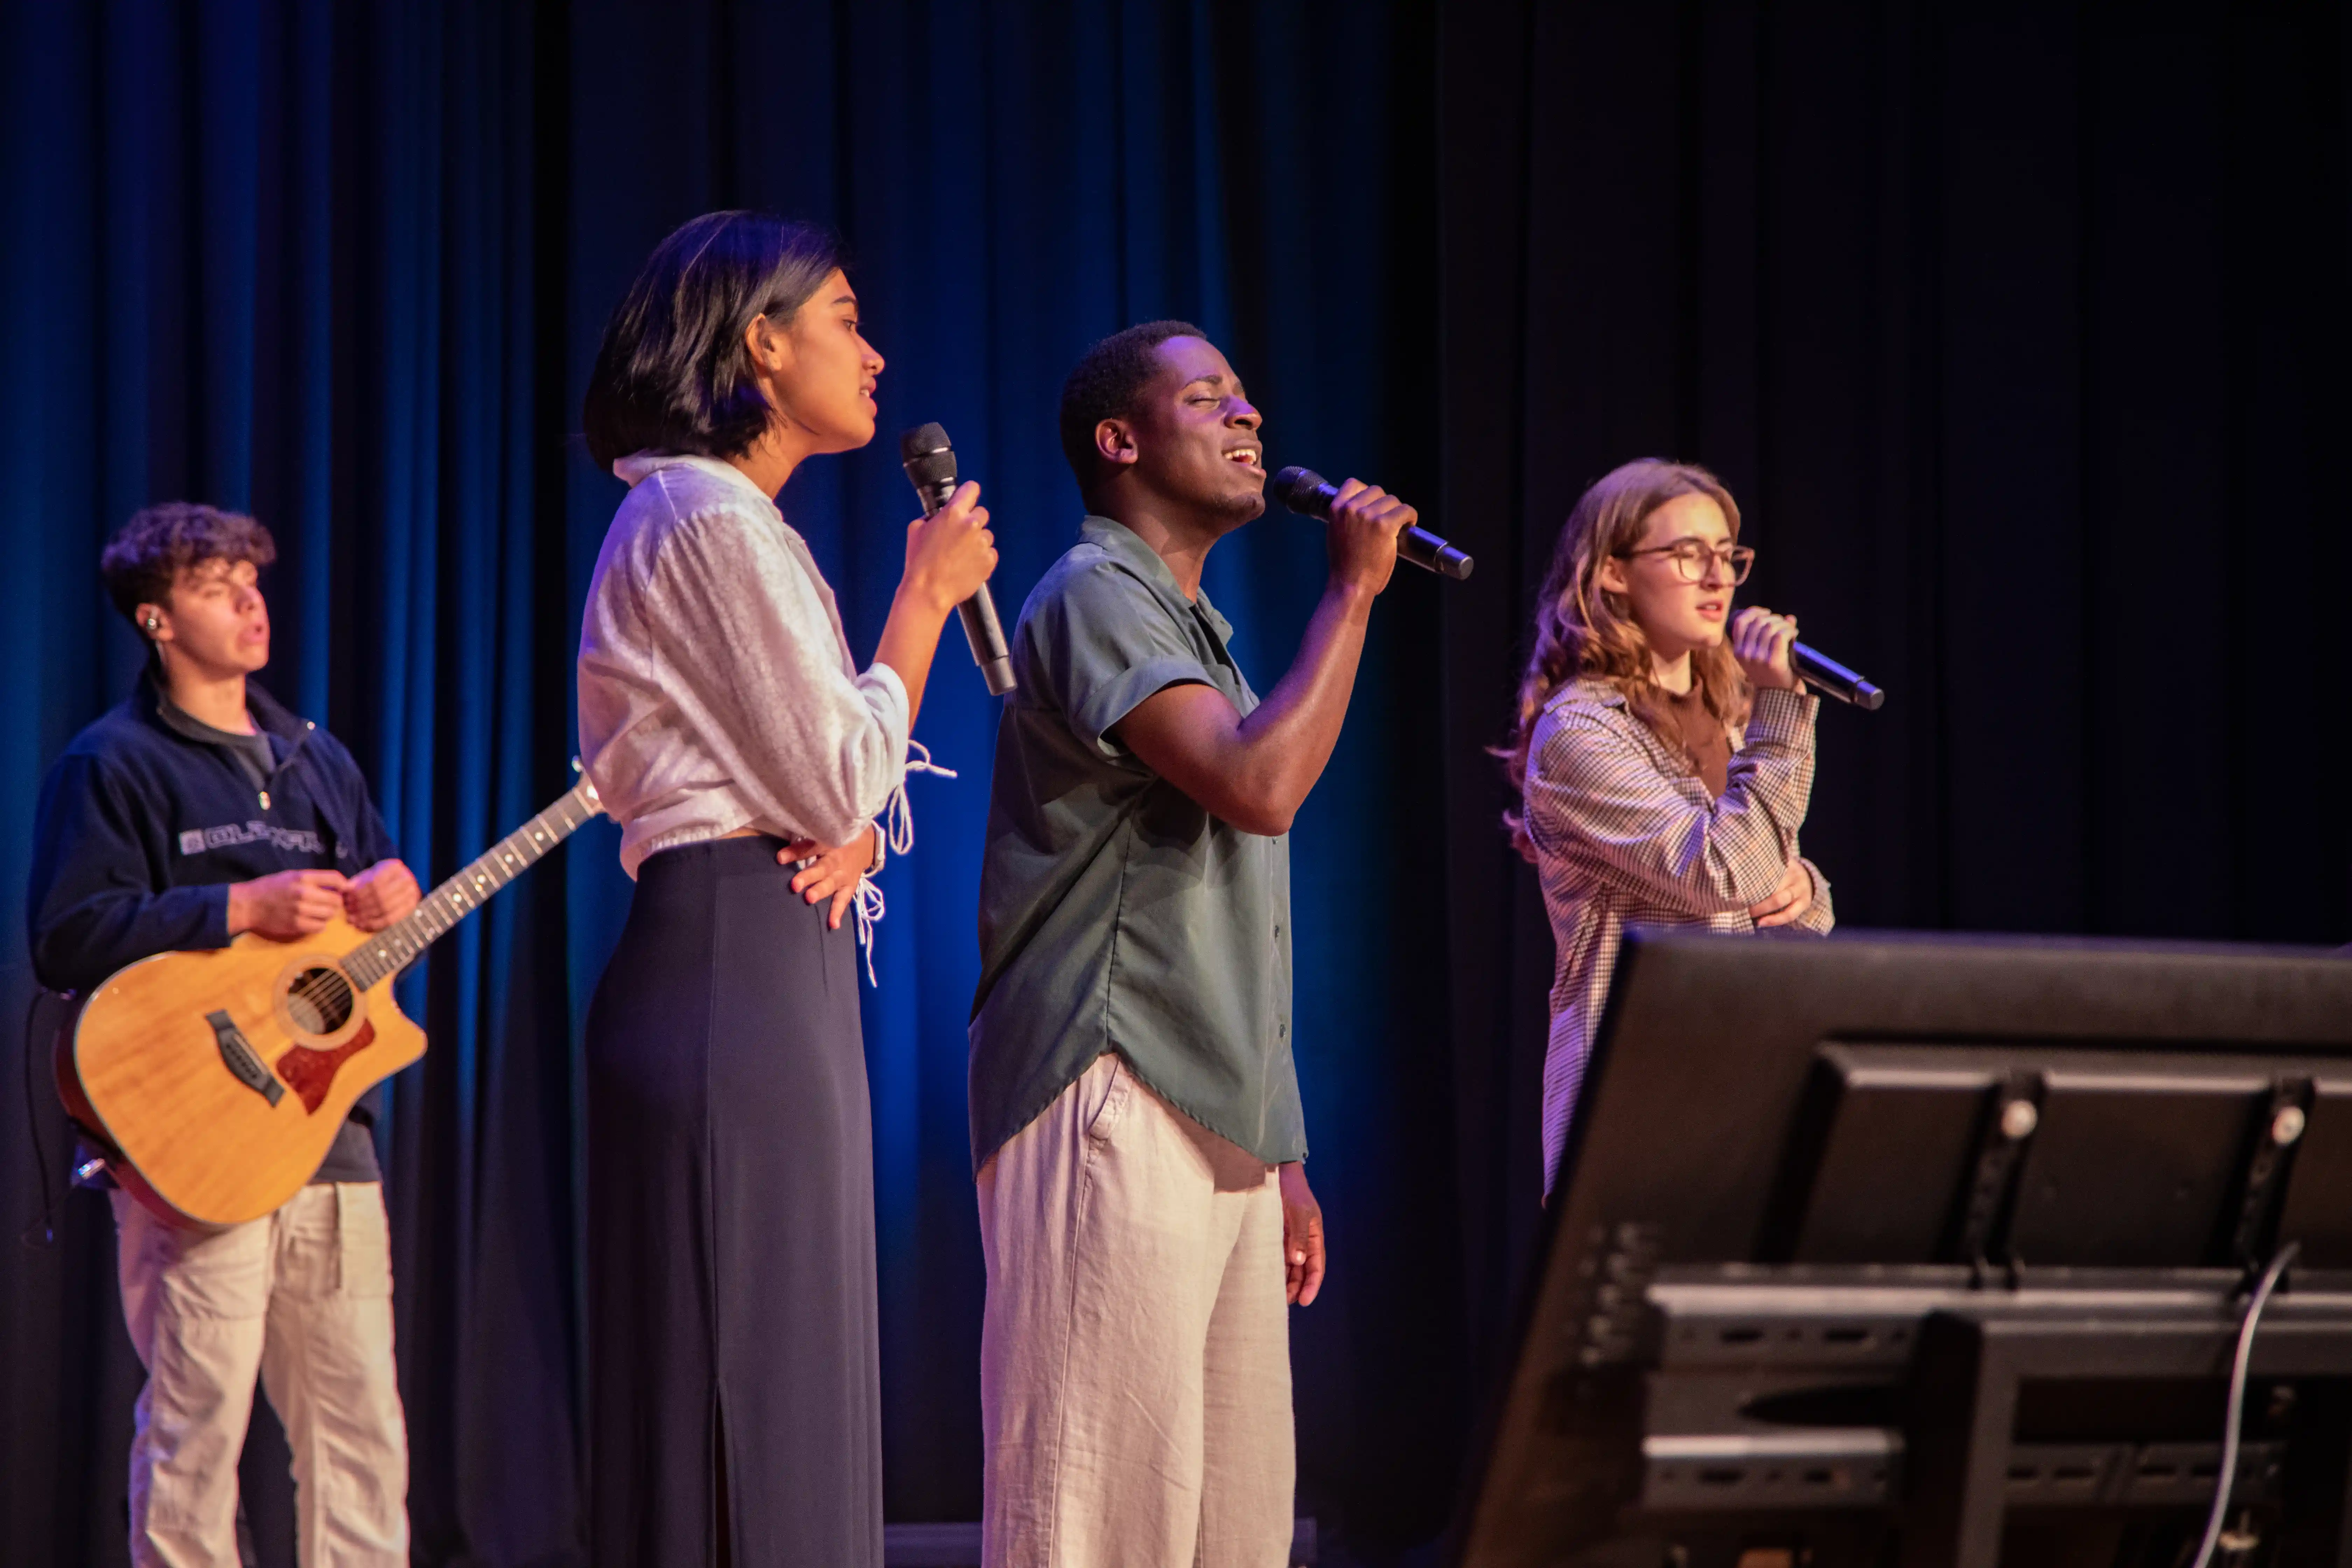 Four students singing Christan music on a stage